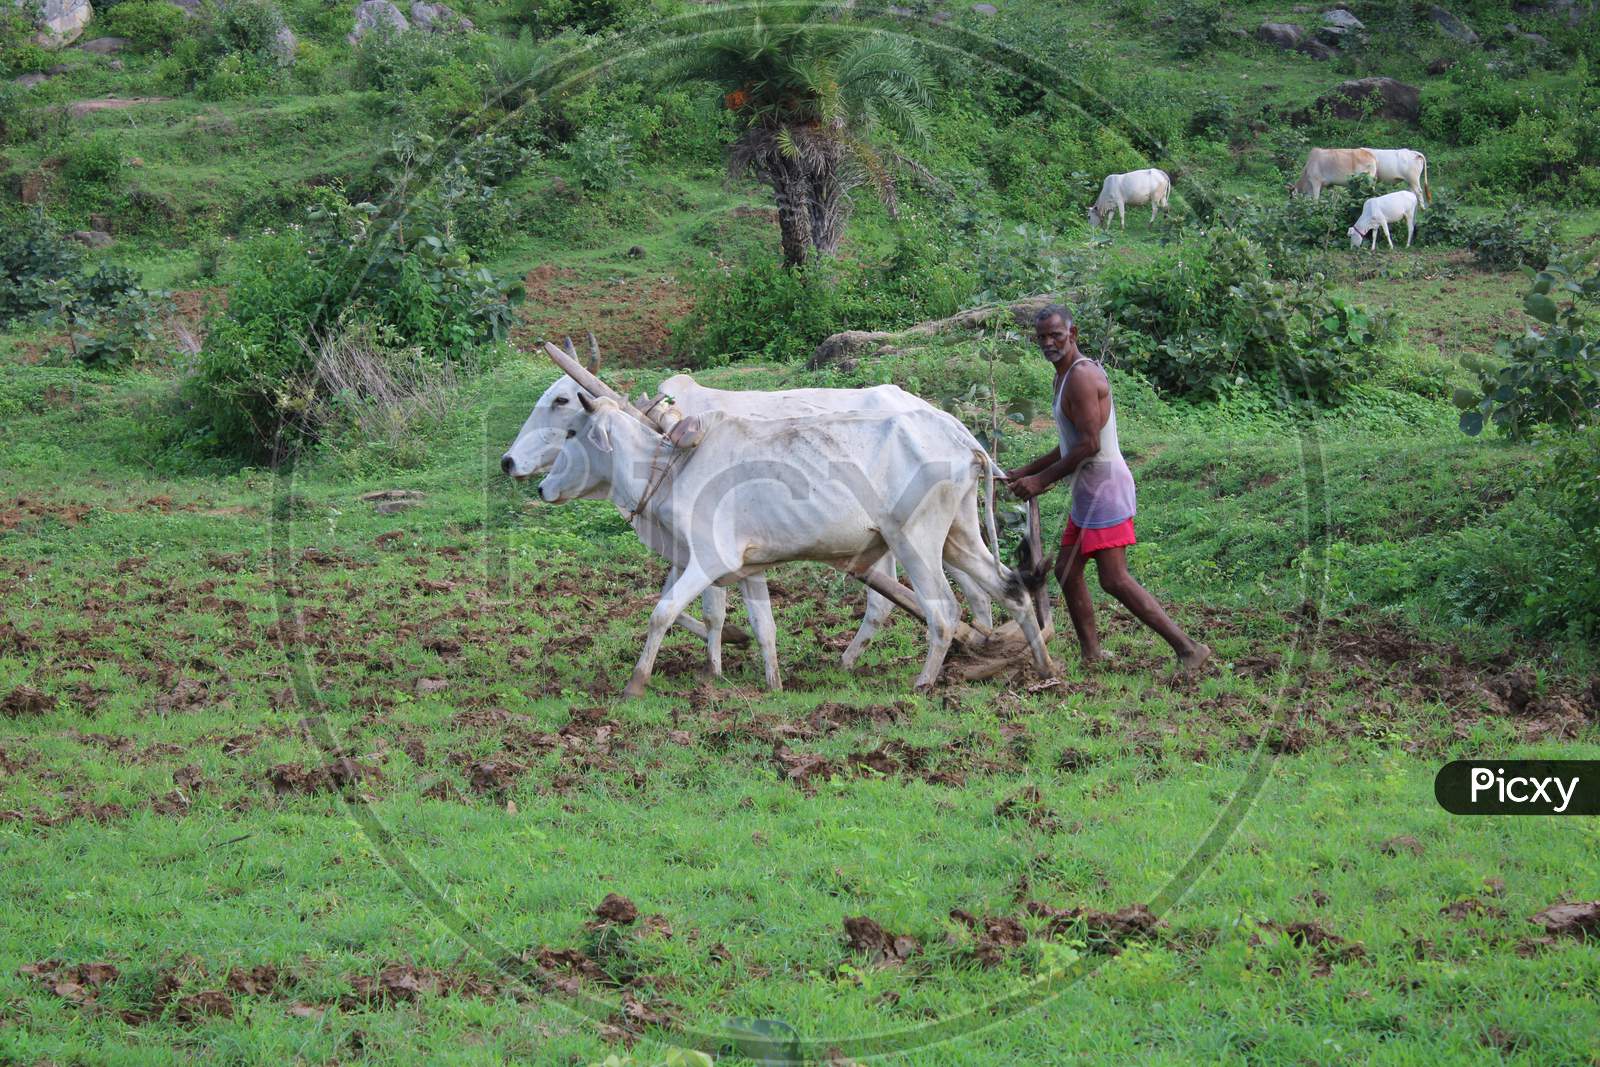 Indian farmer is plowing the field with his Animals ox and farming tool in forest Hillside